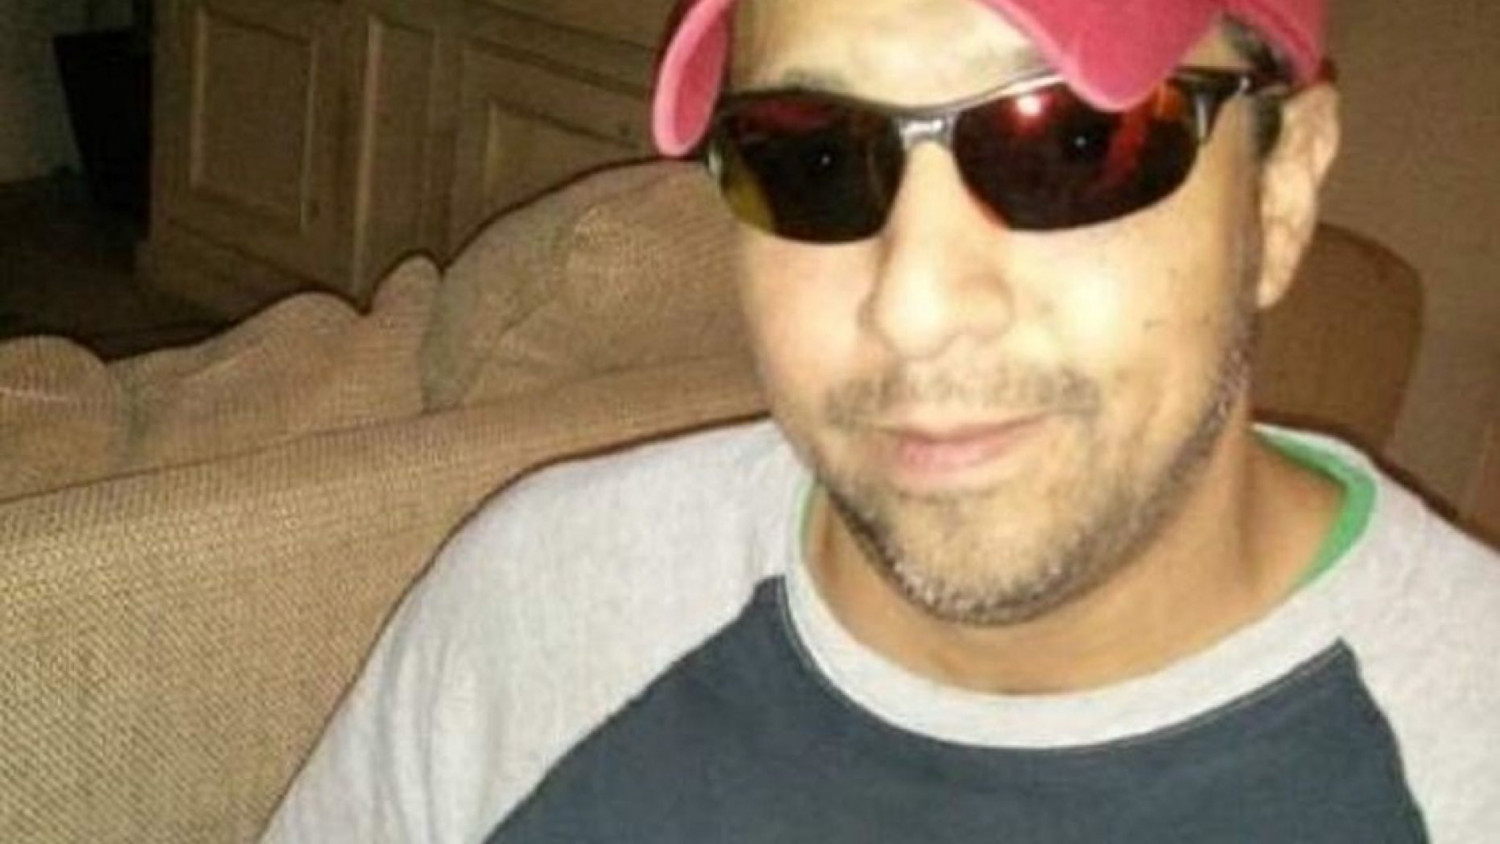 Texas Dad ‘Fighting For His Life’ After Defending Daughter In Violent Attack